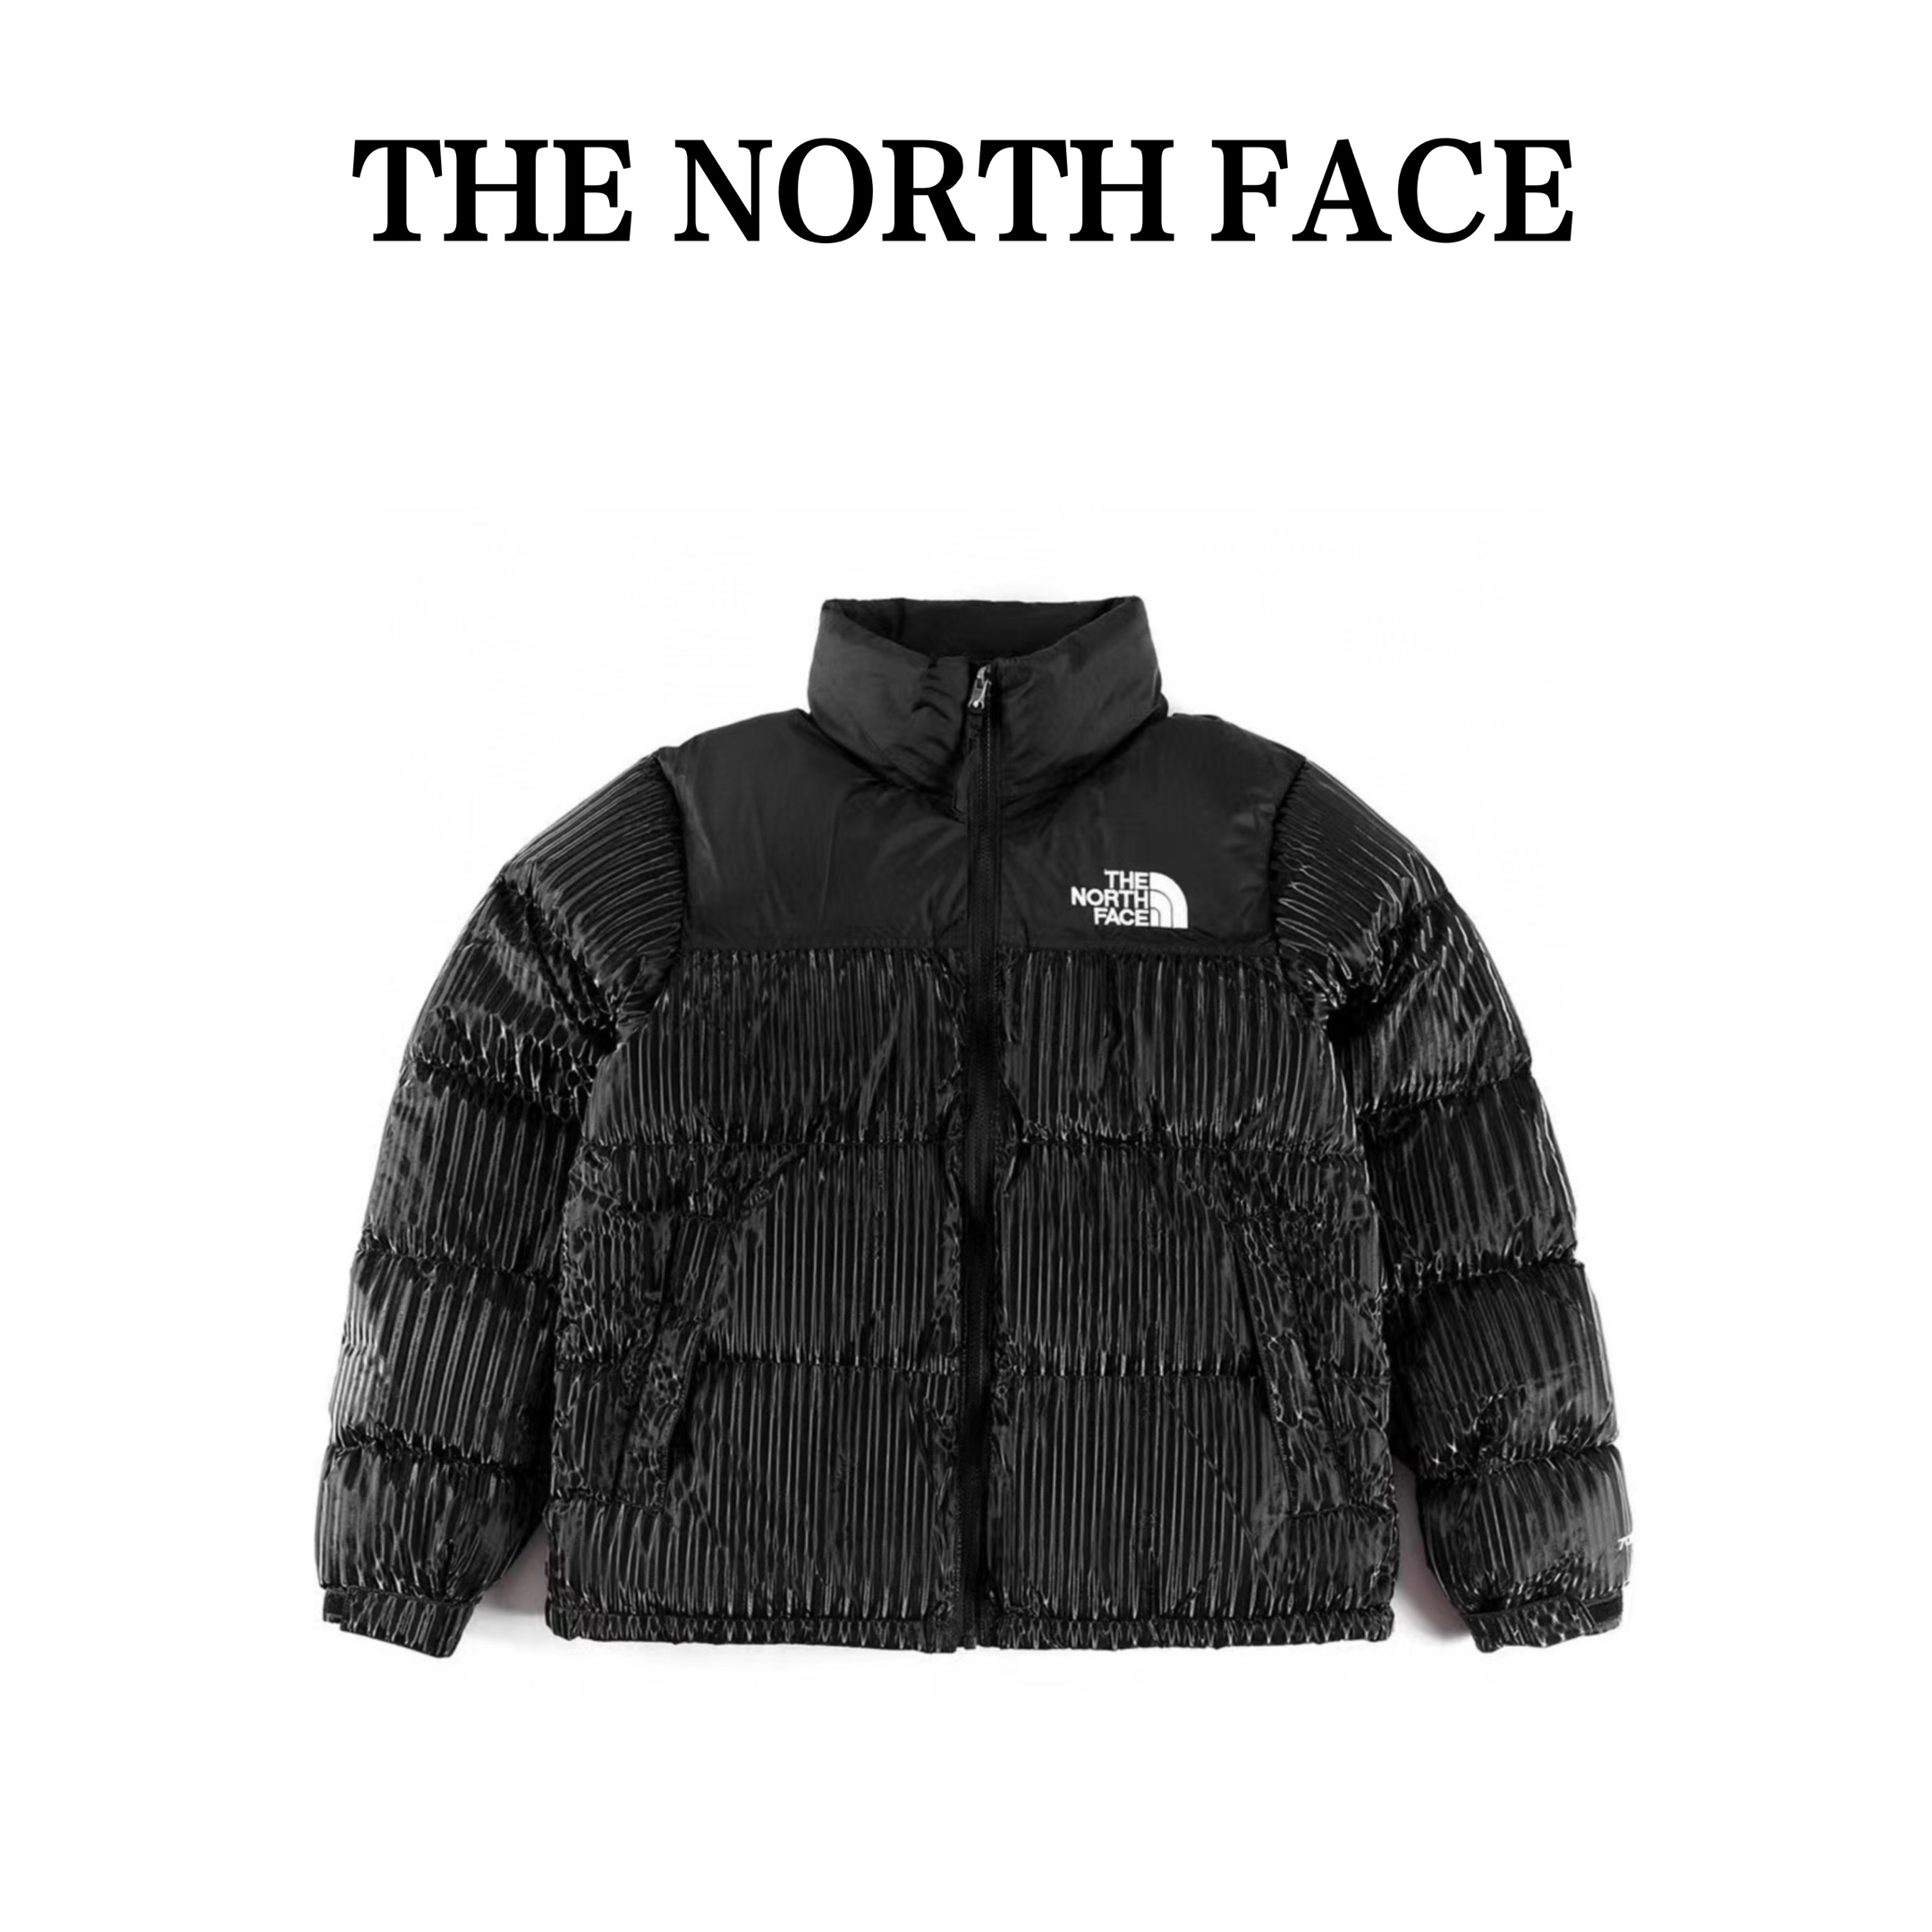 armoede Inleg Australische persoon 高機能】THE NORTH FACE KID´S FORCE JACKET-